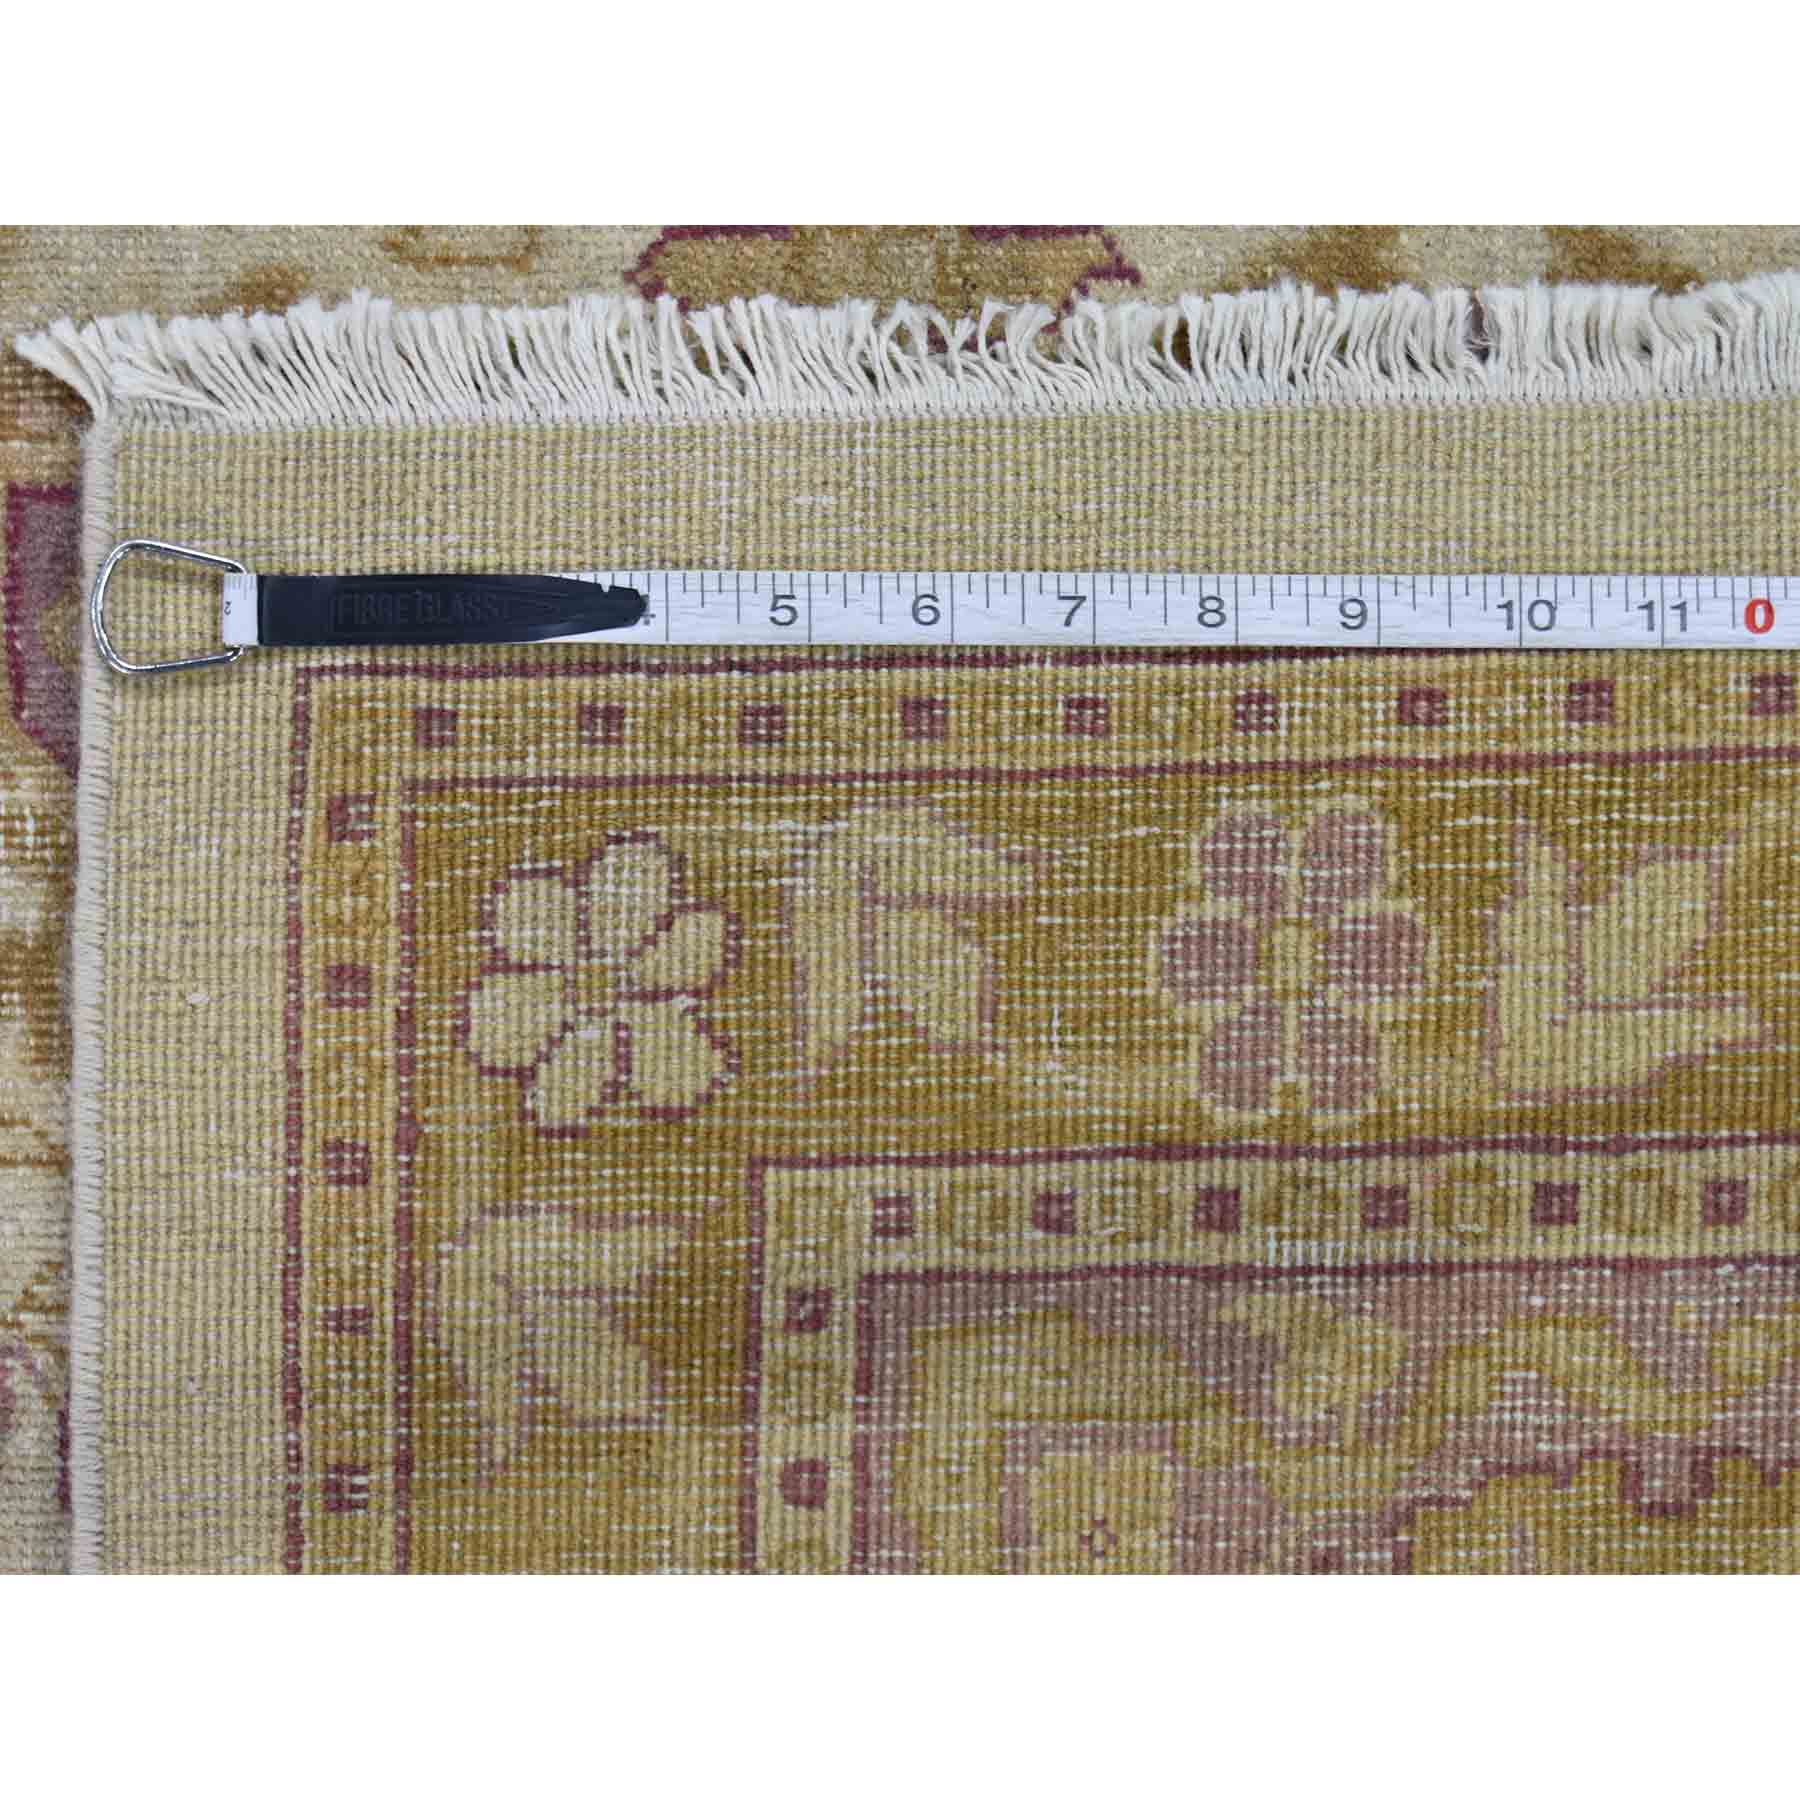 10-7 x16-4  Antique Mughal Amritsar Good Condition Even Wear Hand-Knotted Oriental Oversize Rug 